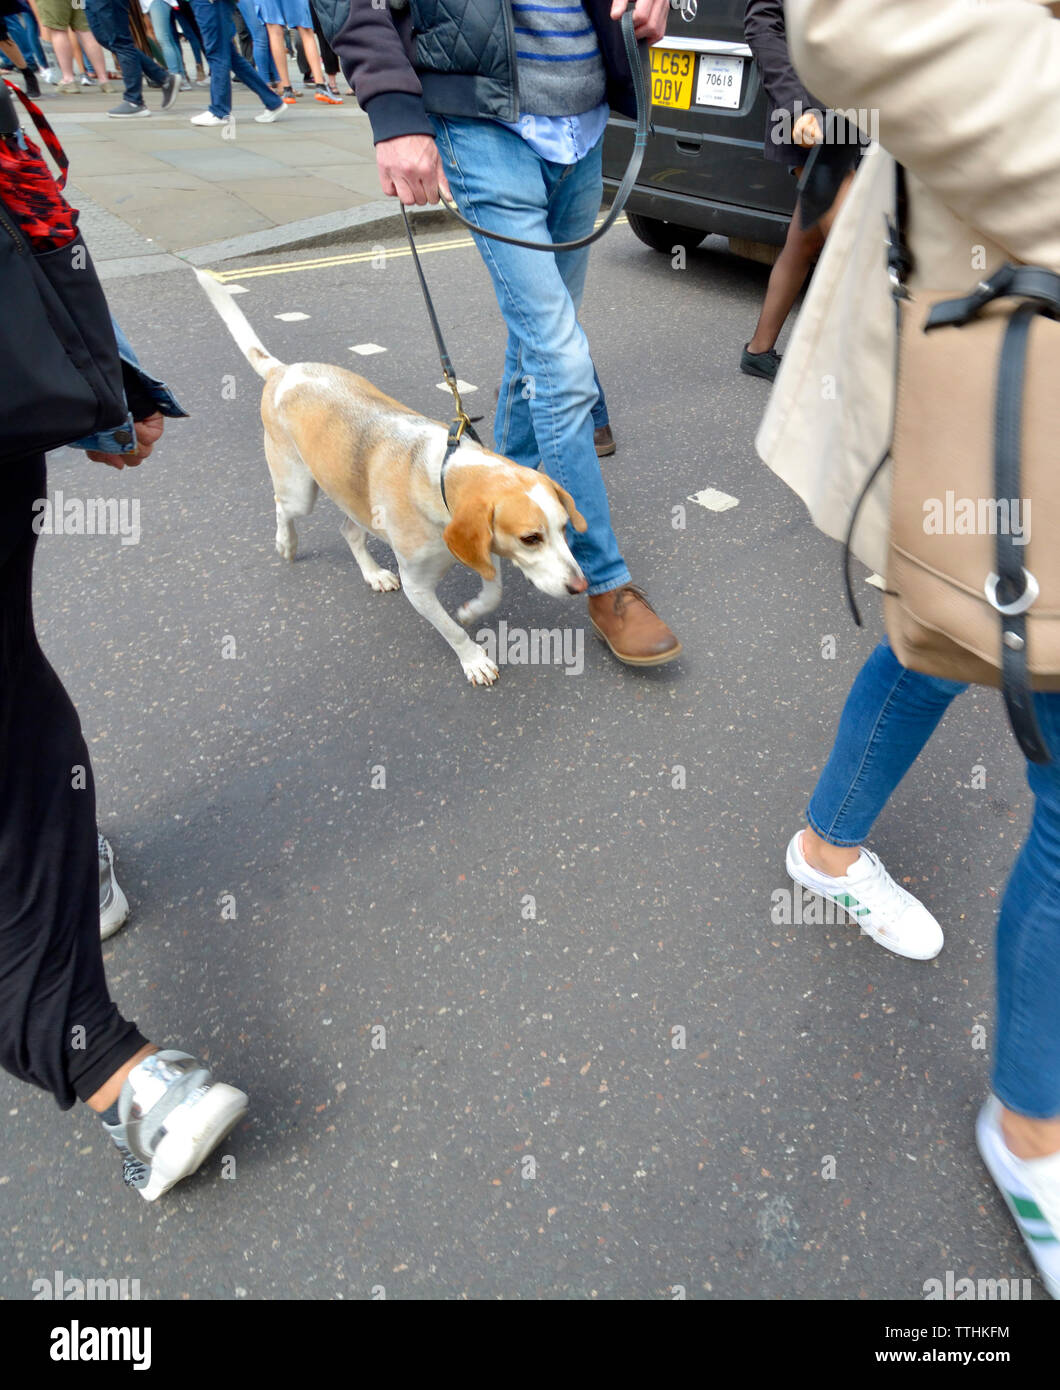 London, England, UK. Pet dog on a leash crossing the road Stock Photo